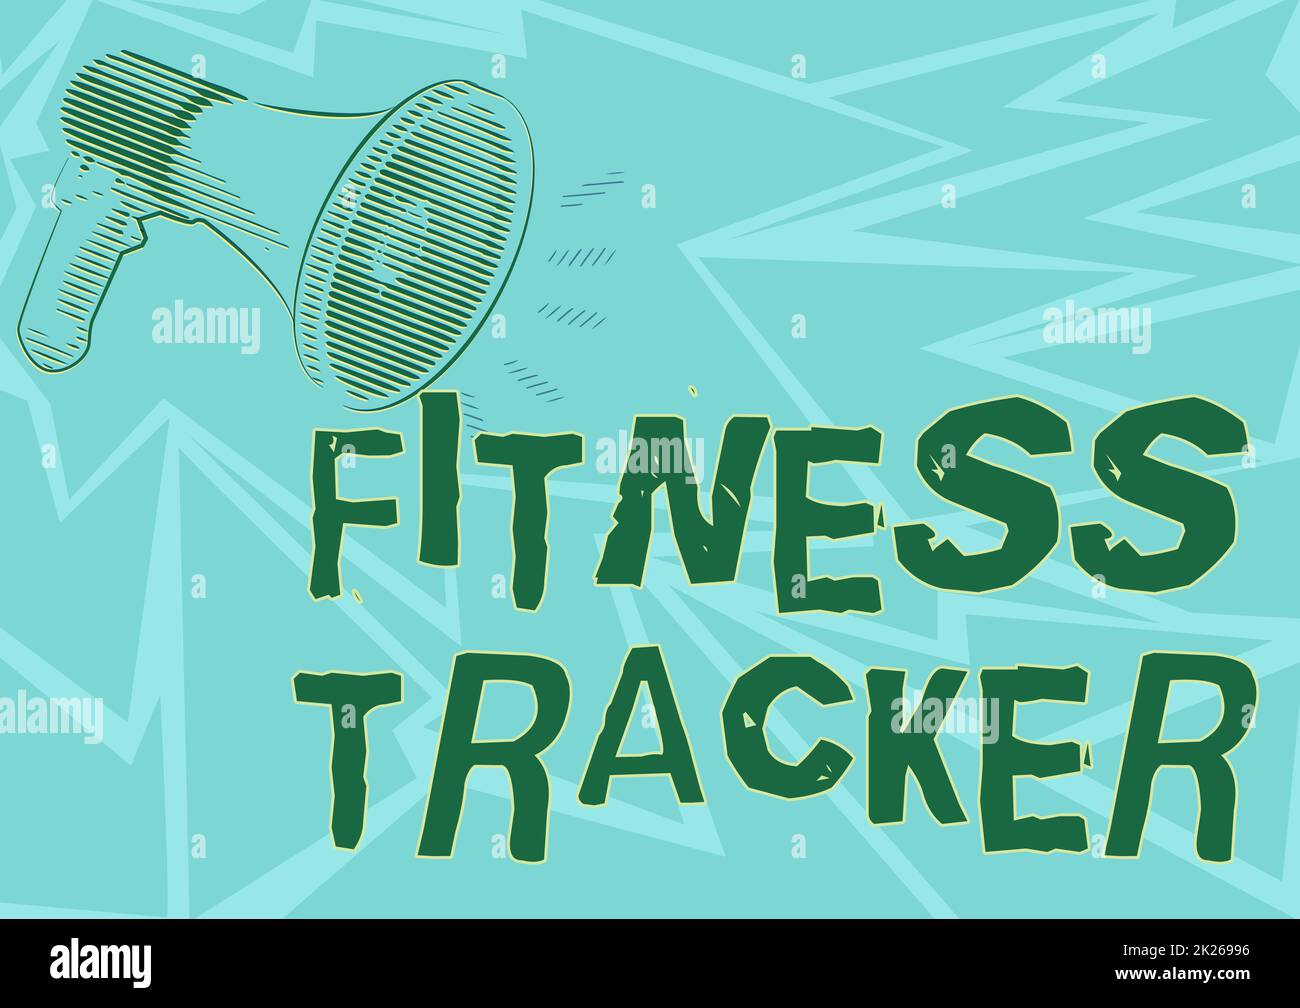 Text sign showing Fitness Tracker. Business showcase a monitoring device that records any healthrelated activity Illustration Of A Loud Megaphones Speaker Making New Announcements. Stock Photo